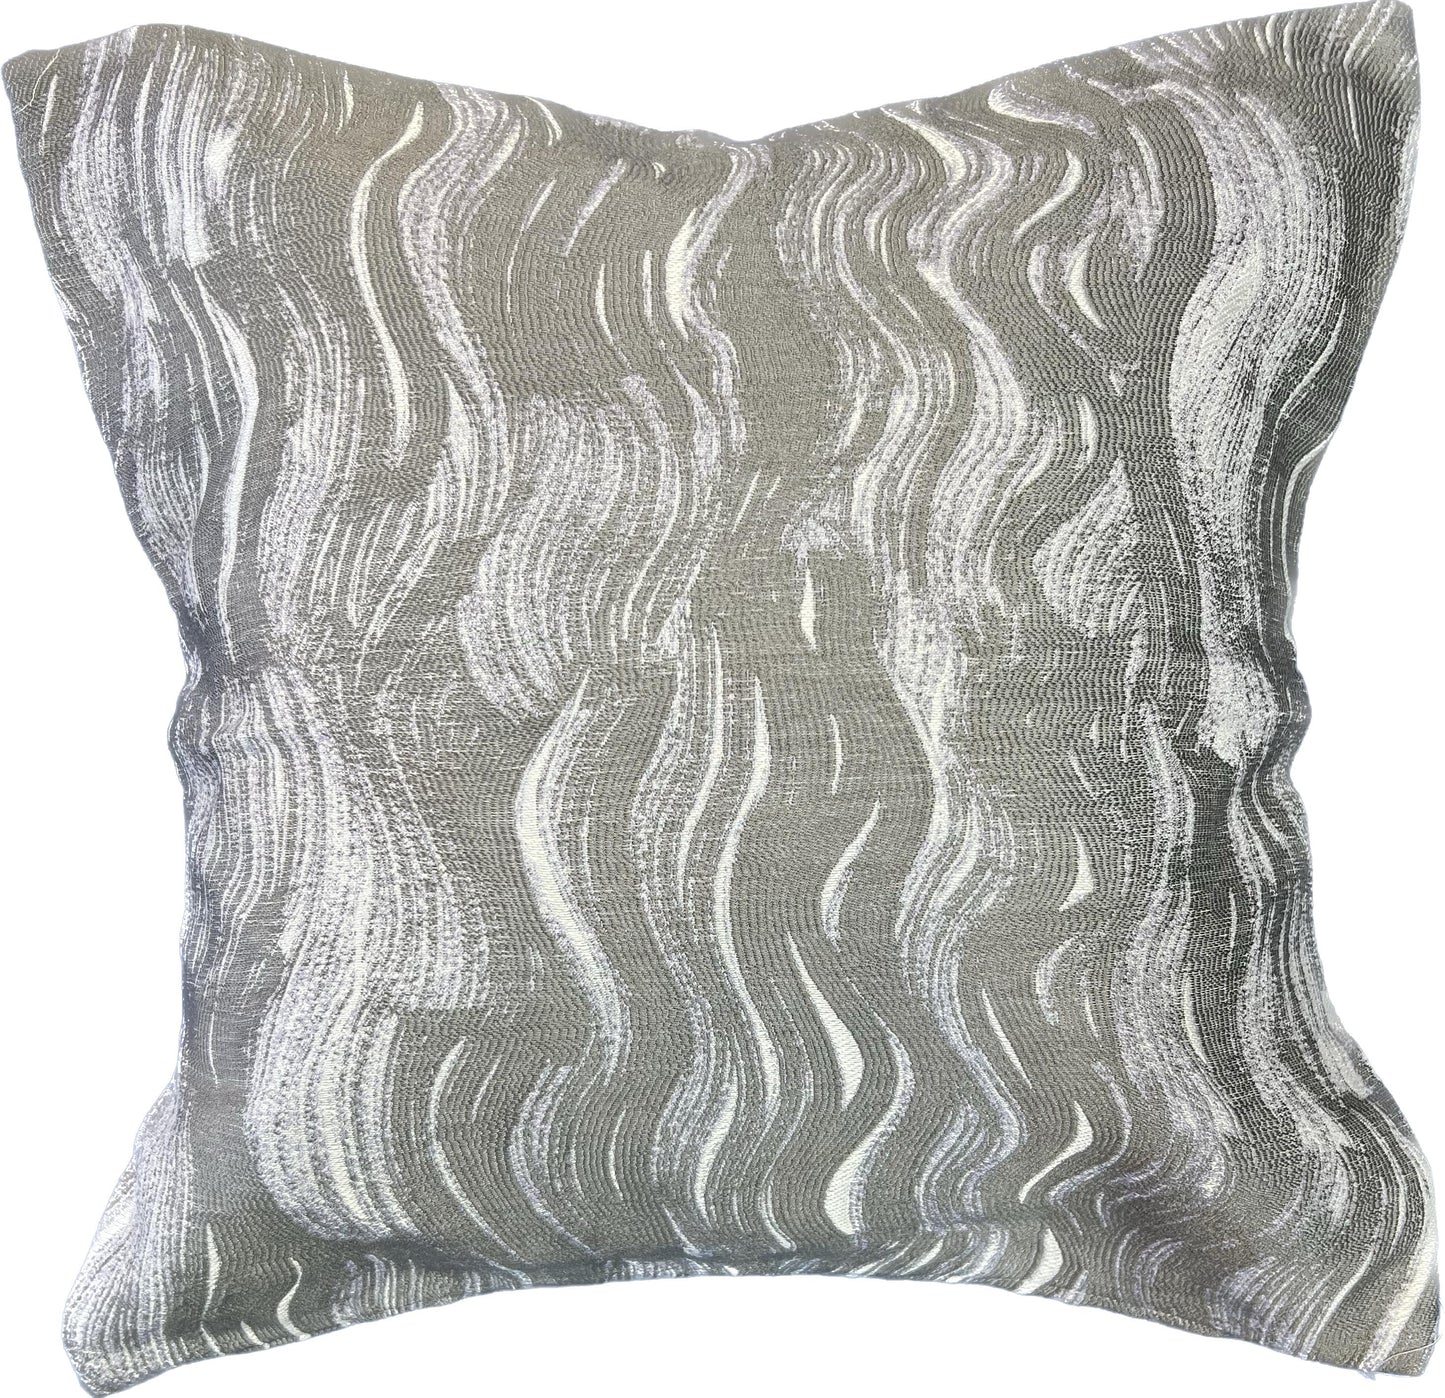 18"x18"  Weaves Pillow Cover